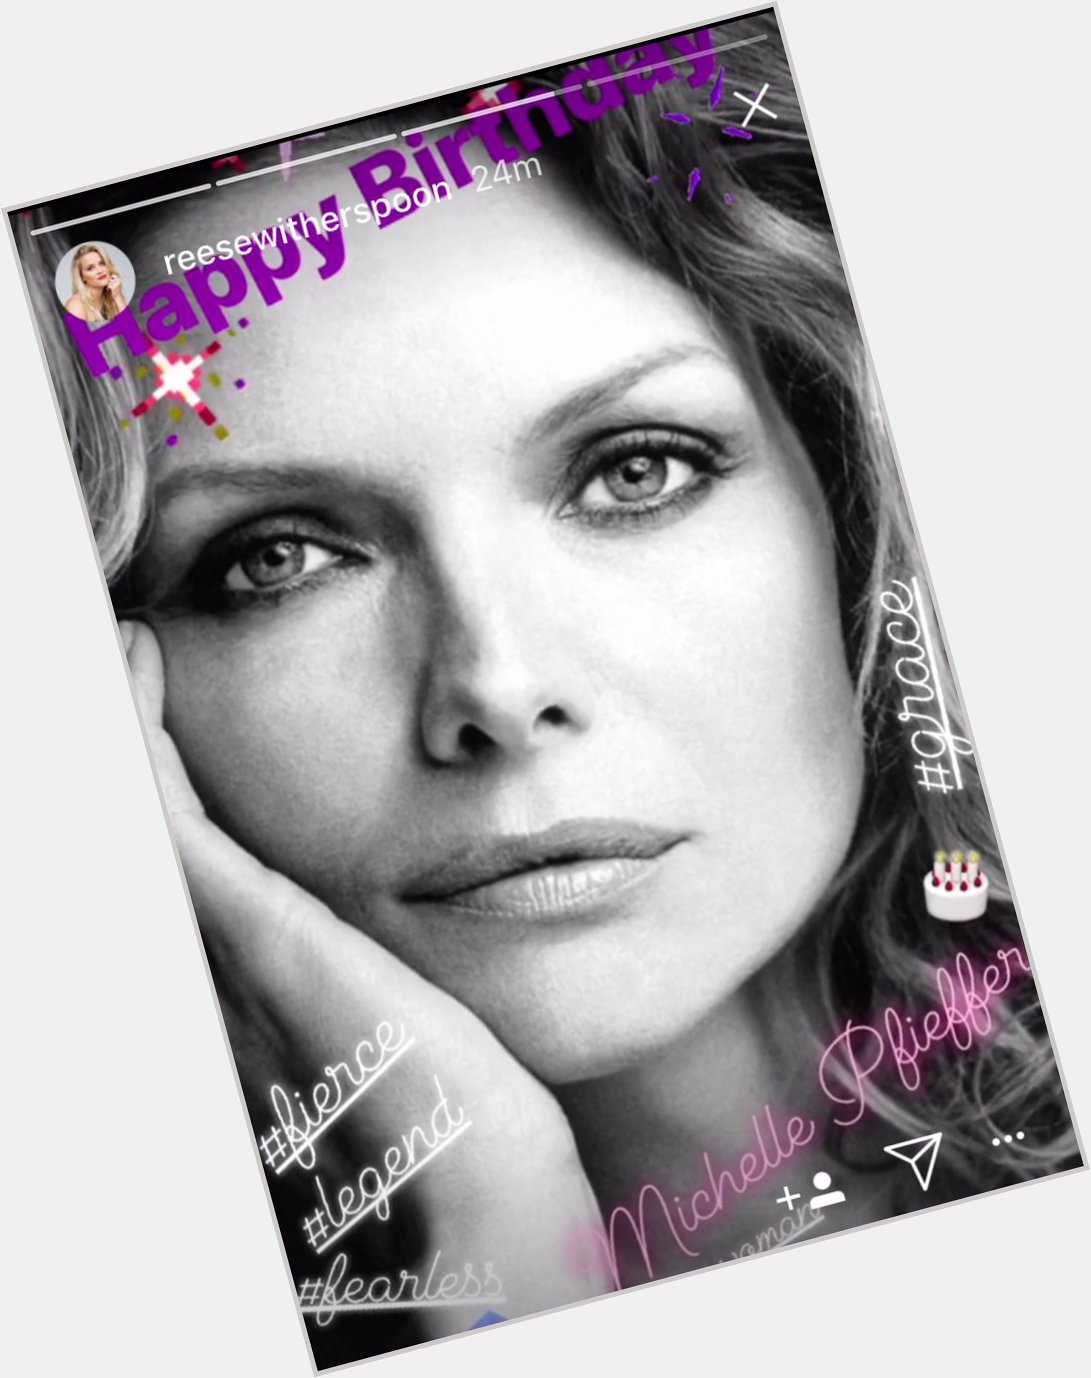 Reese Witherspoon wishing Michelle Pfeiffer a happy birthday on Instagram 